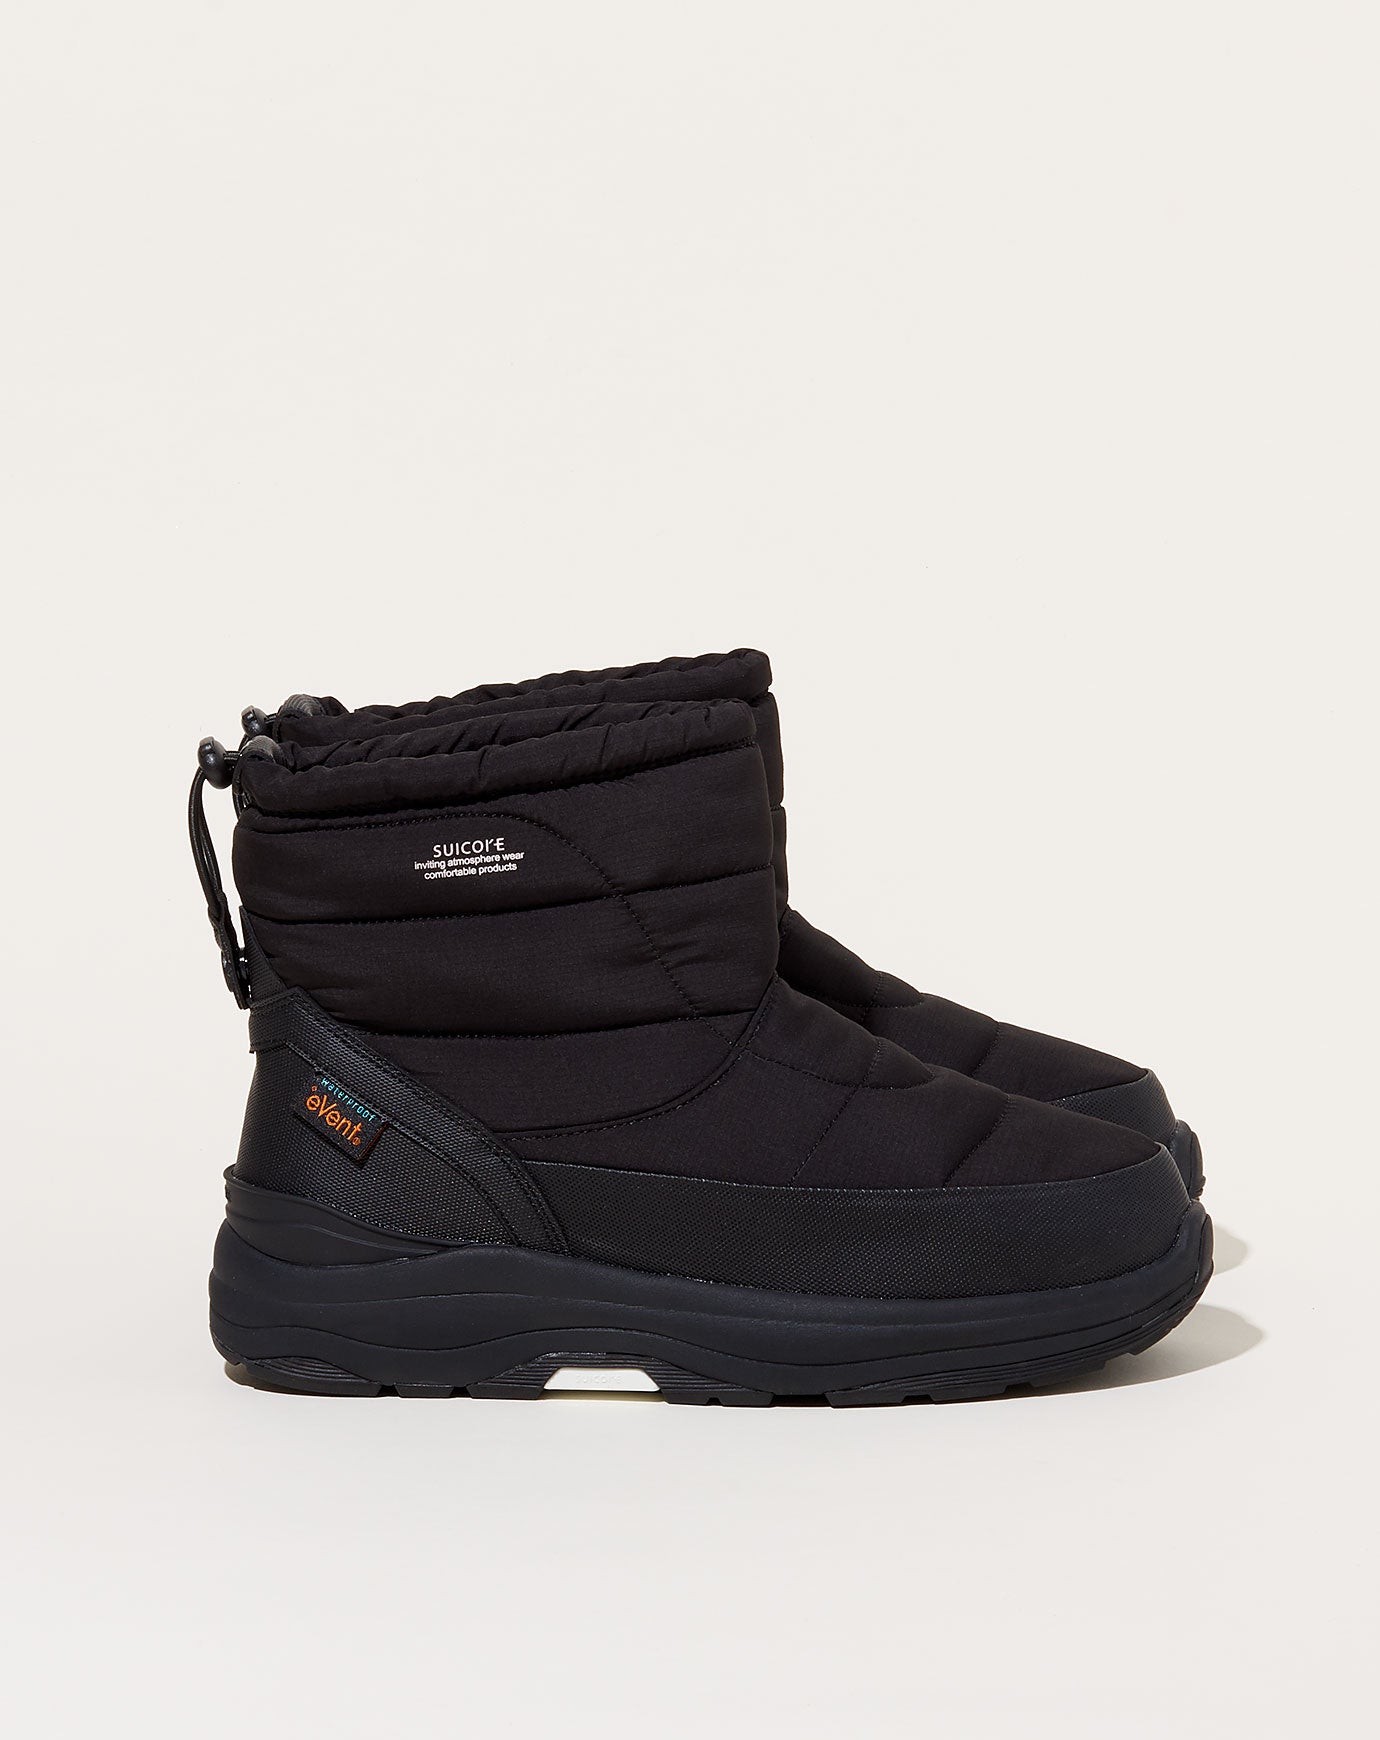 BOWER-evab Boot in Black